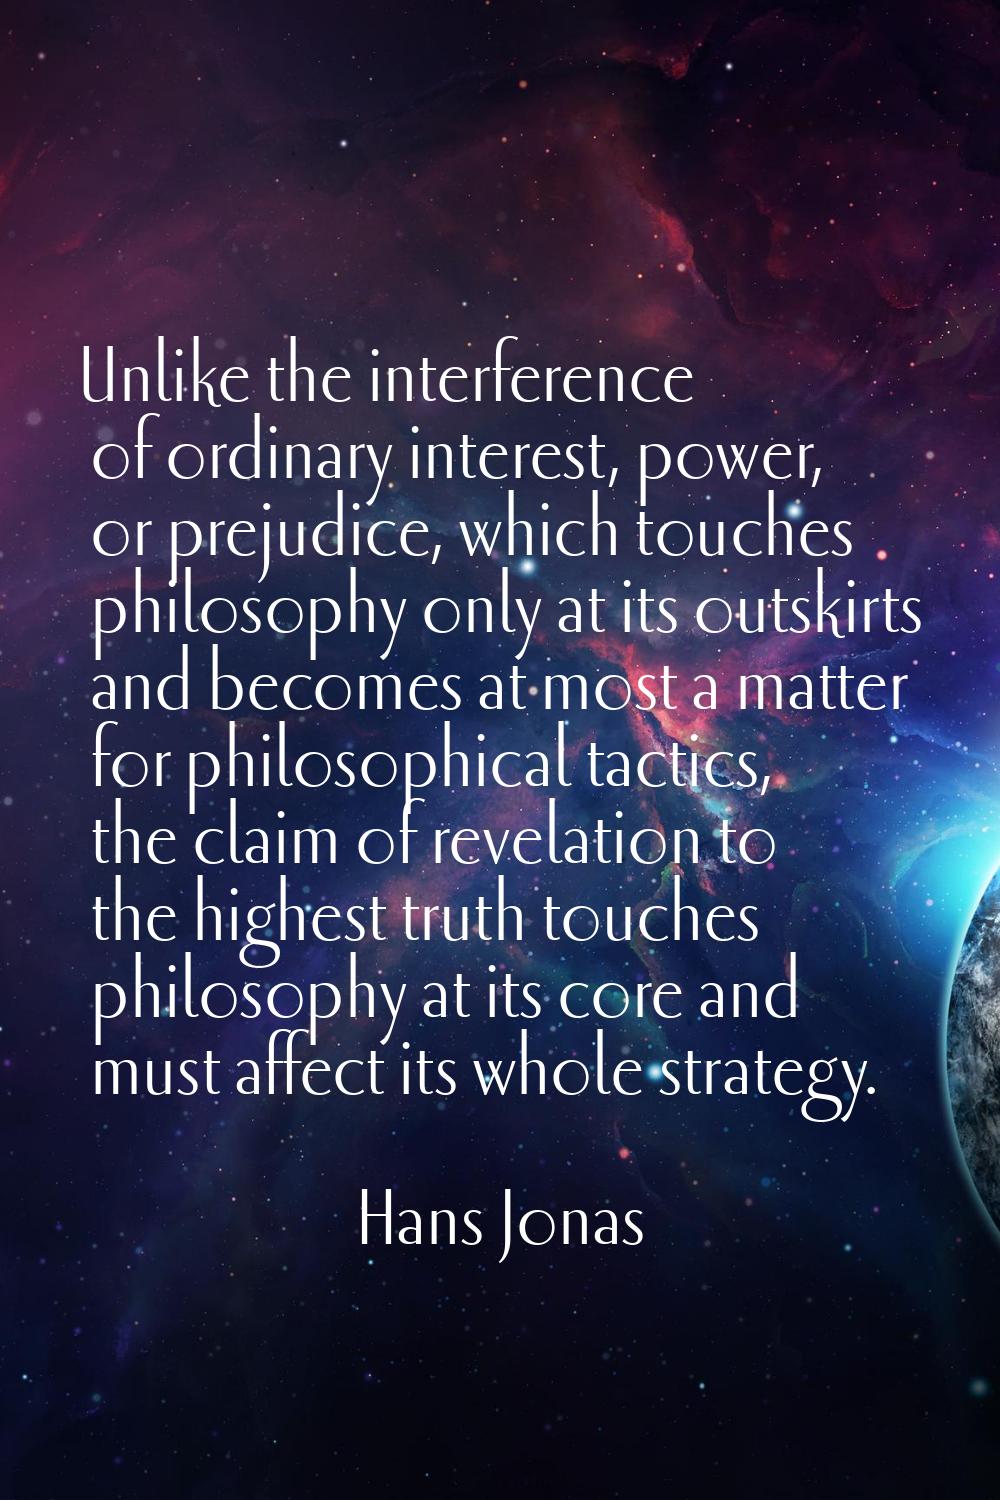 Unlike the interference of ordinary interest, power, or prejudice, which touches philosophy only at